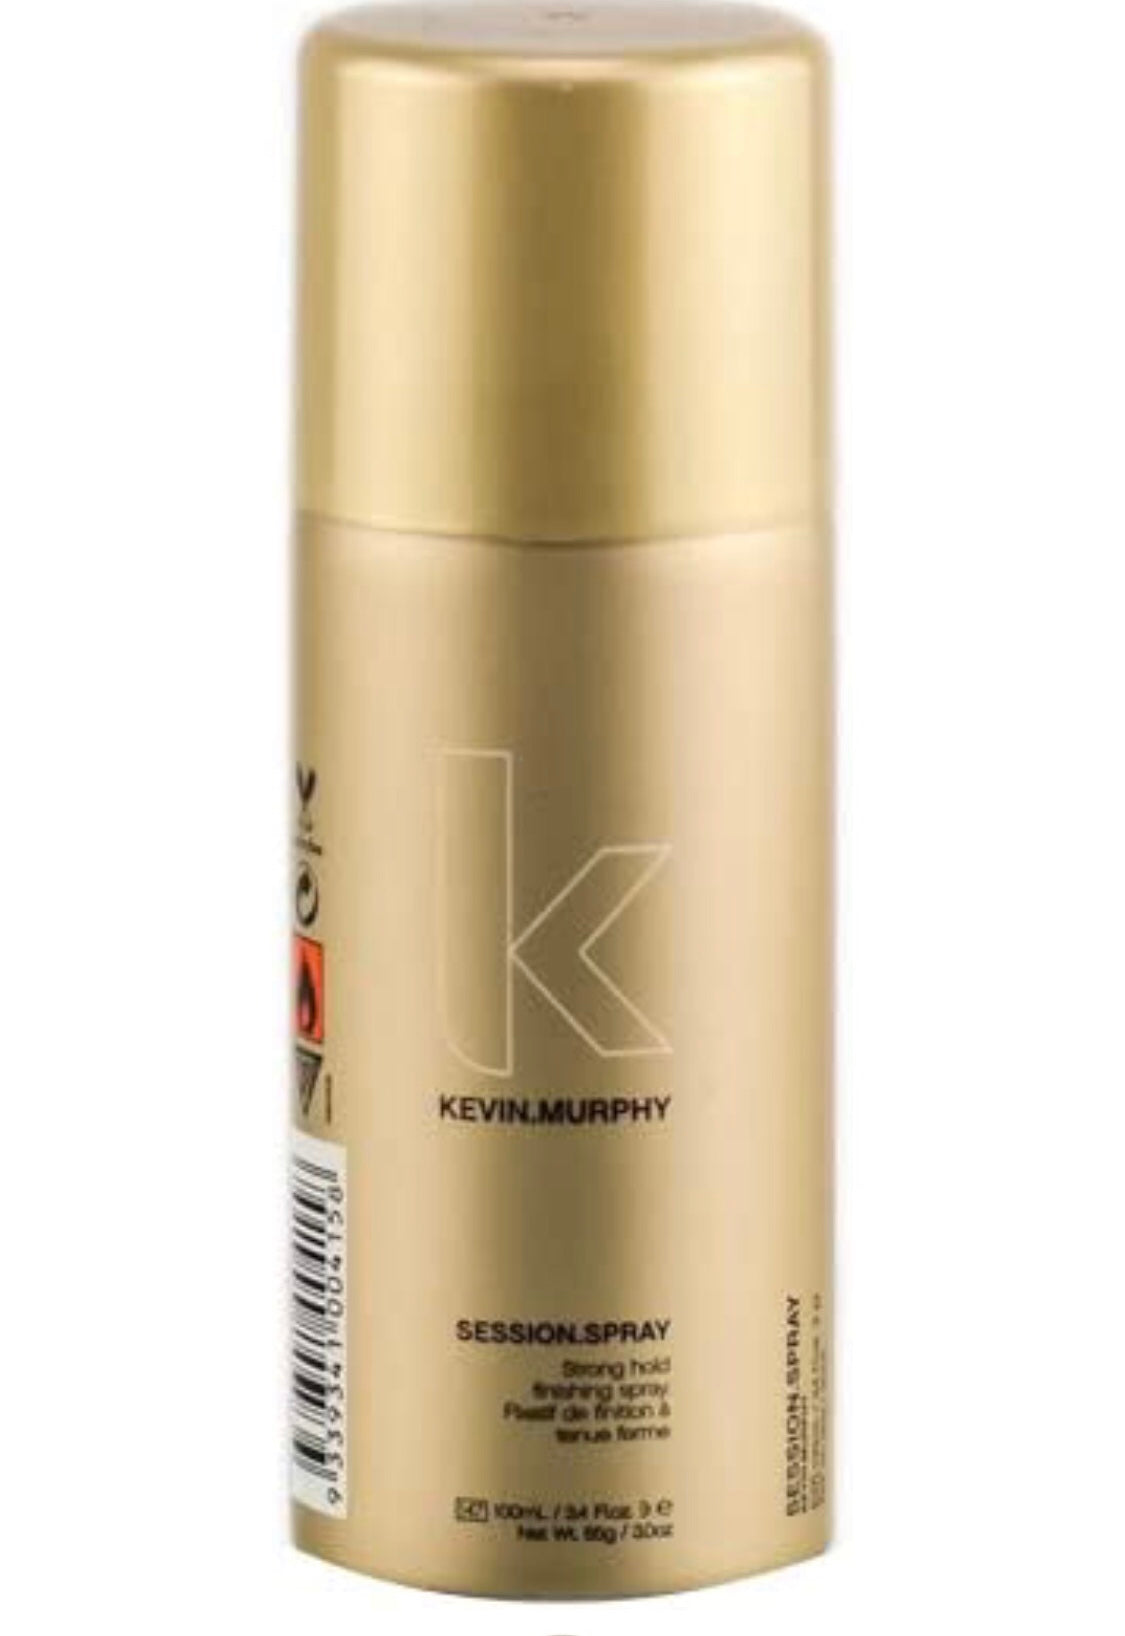 Kevin.Murphy - Session.Spray strong hold  3.4 fl. oz. / 100 ml